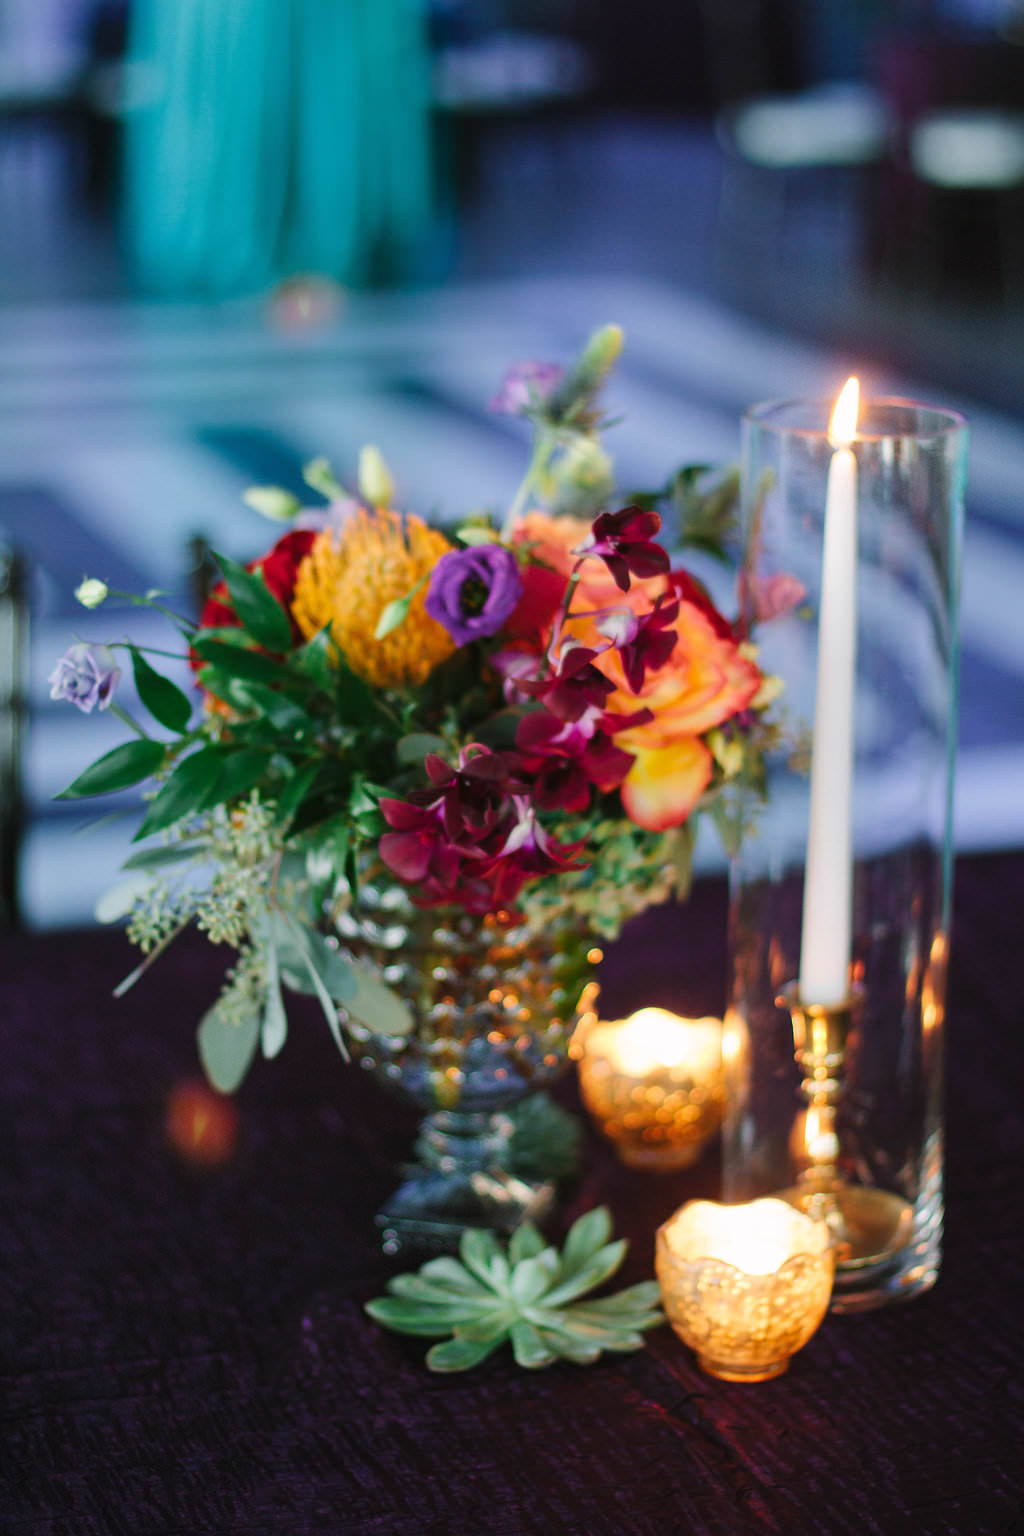 Whimsical Jewel Tone Wedding Reception Table Decor with Small Dark Red, Yellow, and Purple Flowers with Greenery and Succulent Centerpiece and Gold Tea Lights and Taper Candle in Dainty Gold Candleholder in Glass Vase